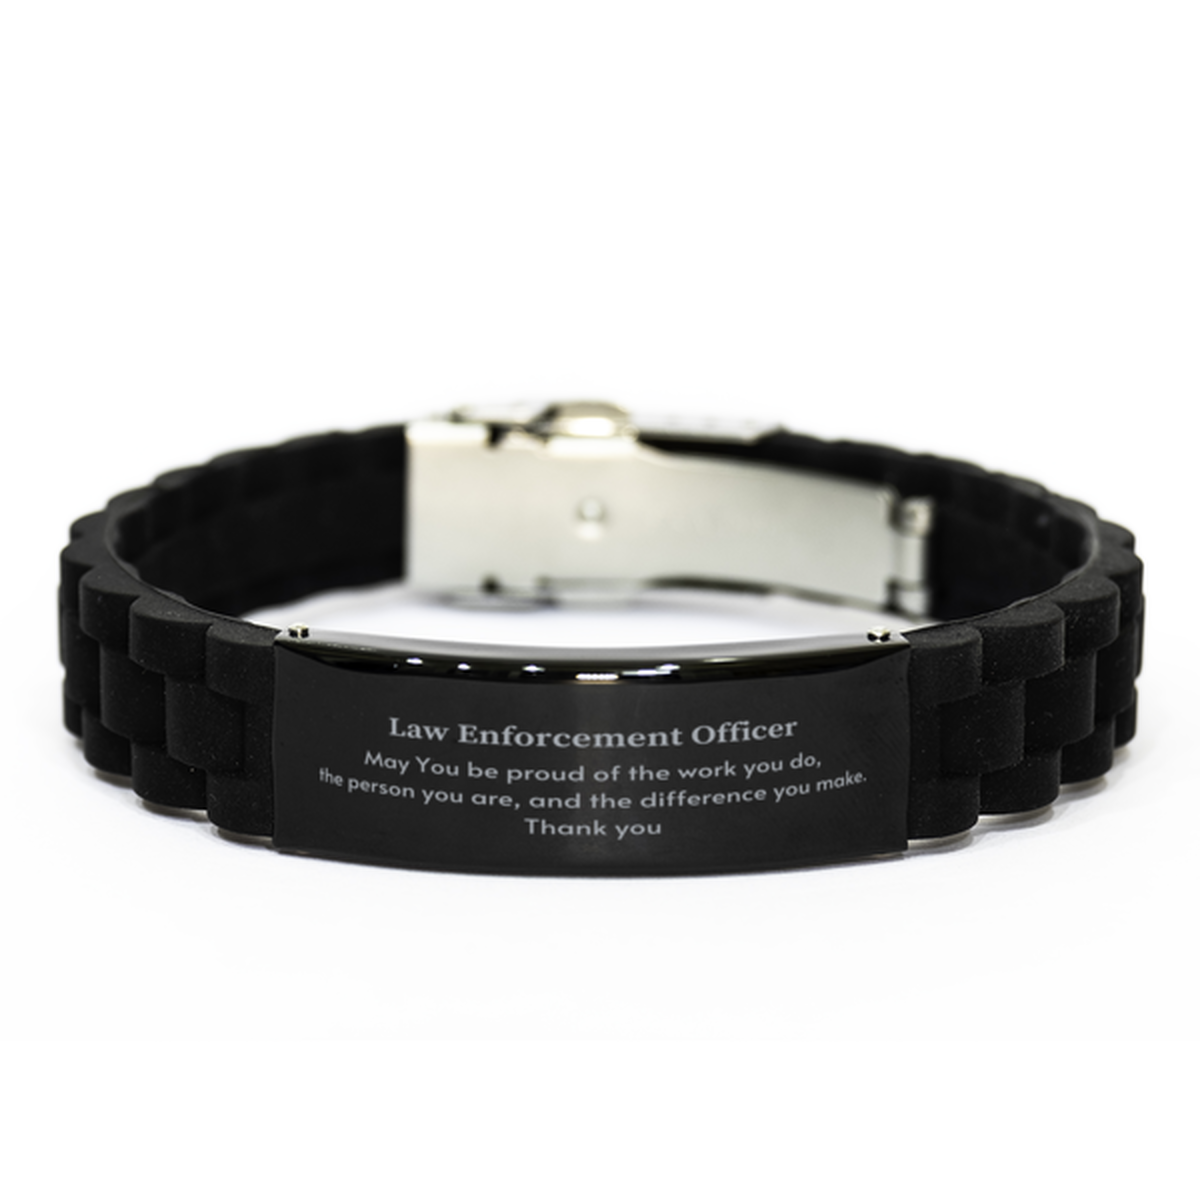 Heartwarming Black Glidelock Clasp Bracelet Retirement Coworkers Gifts for Law Enforcement Officer, Law Enforcement Officer May You be proud of the work you do, the person you are Gifts for Boss Men Women Friends